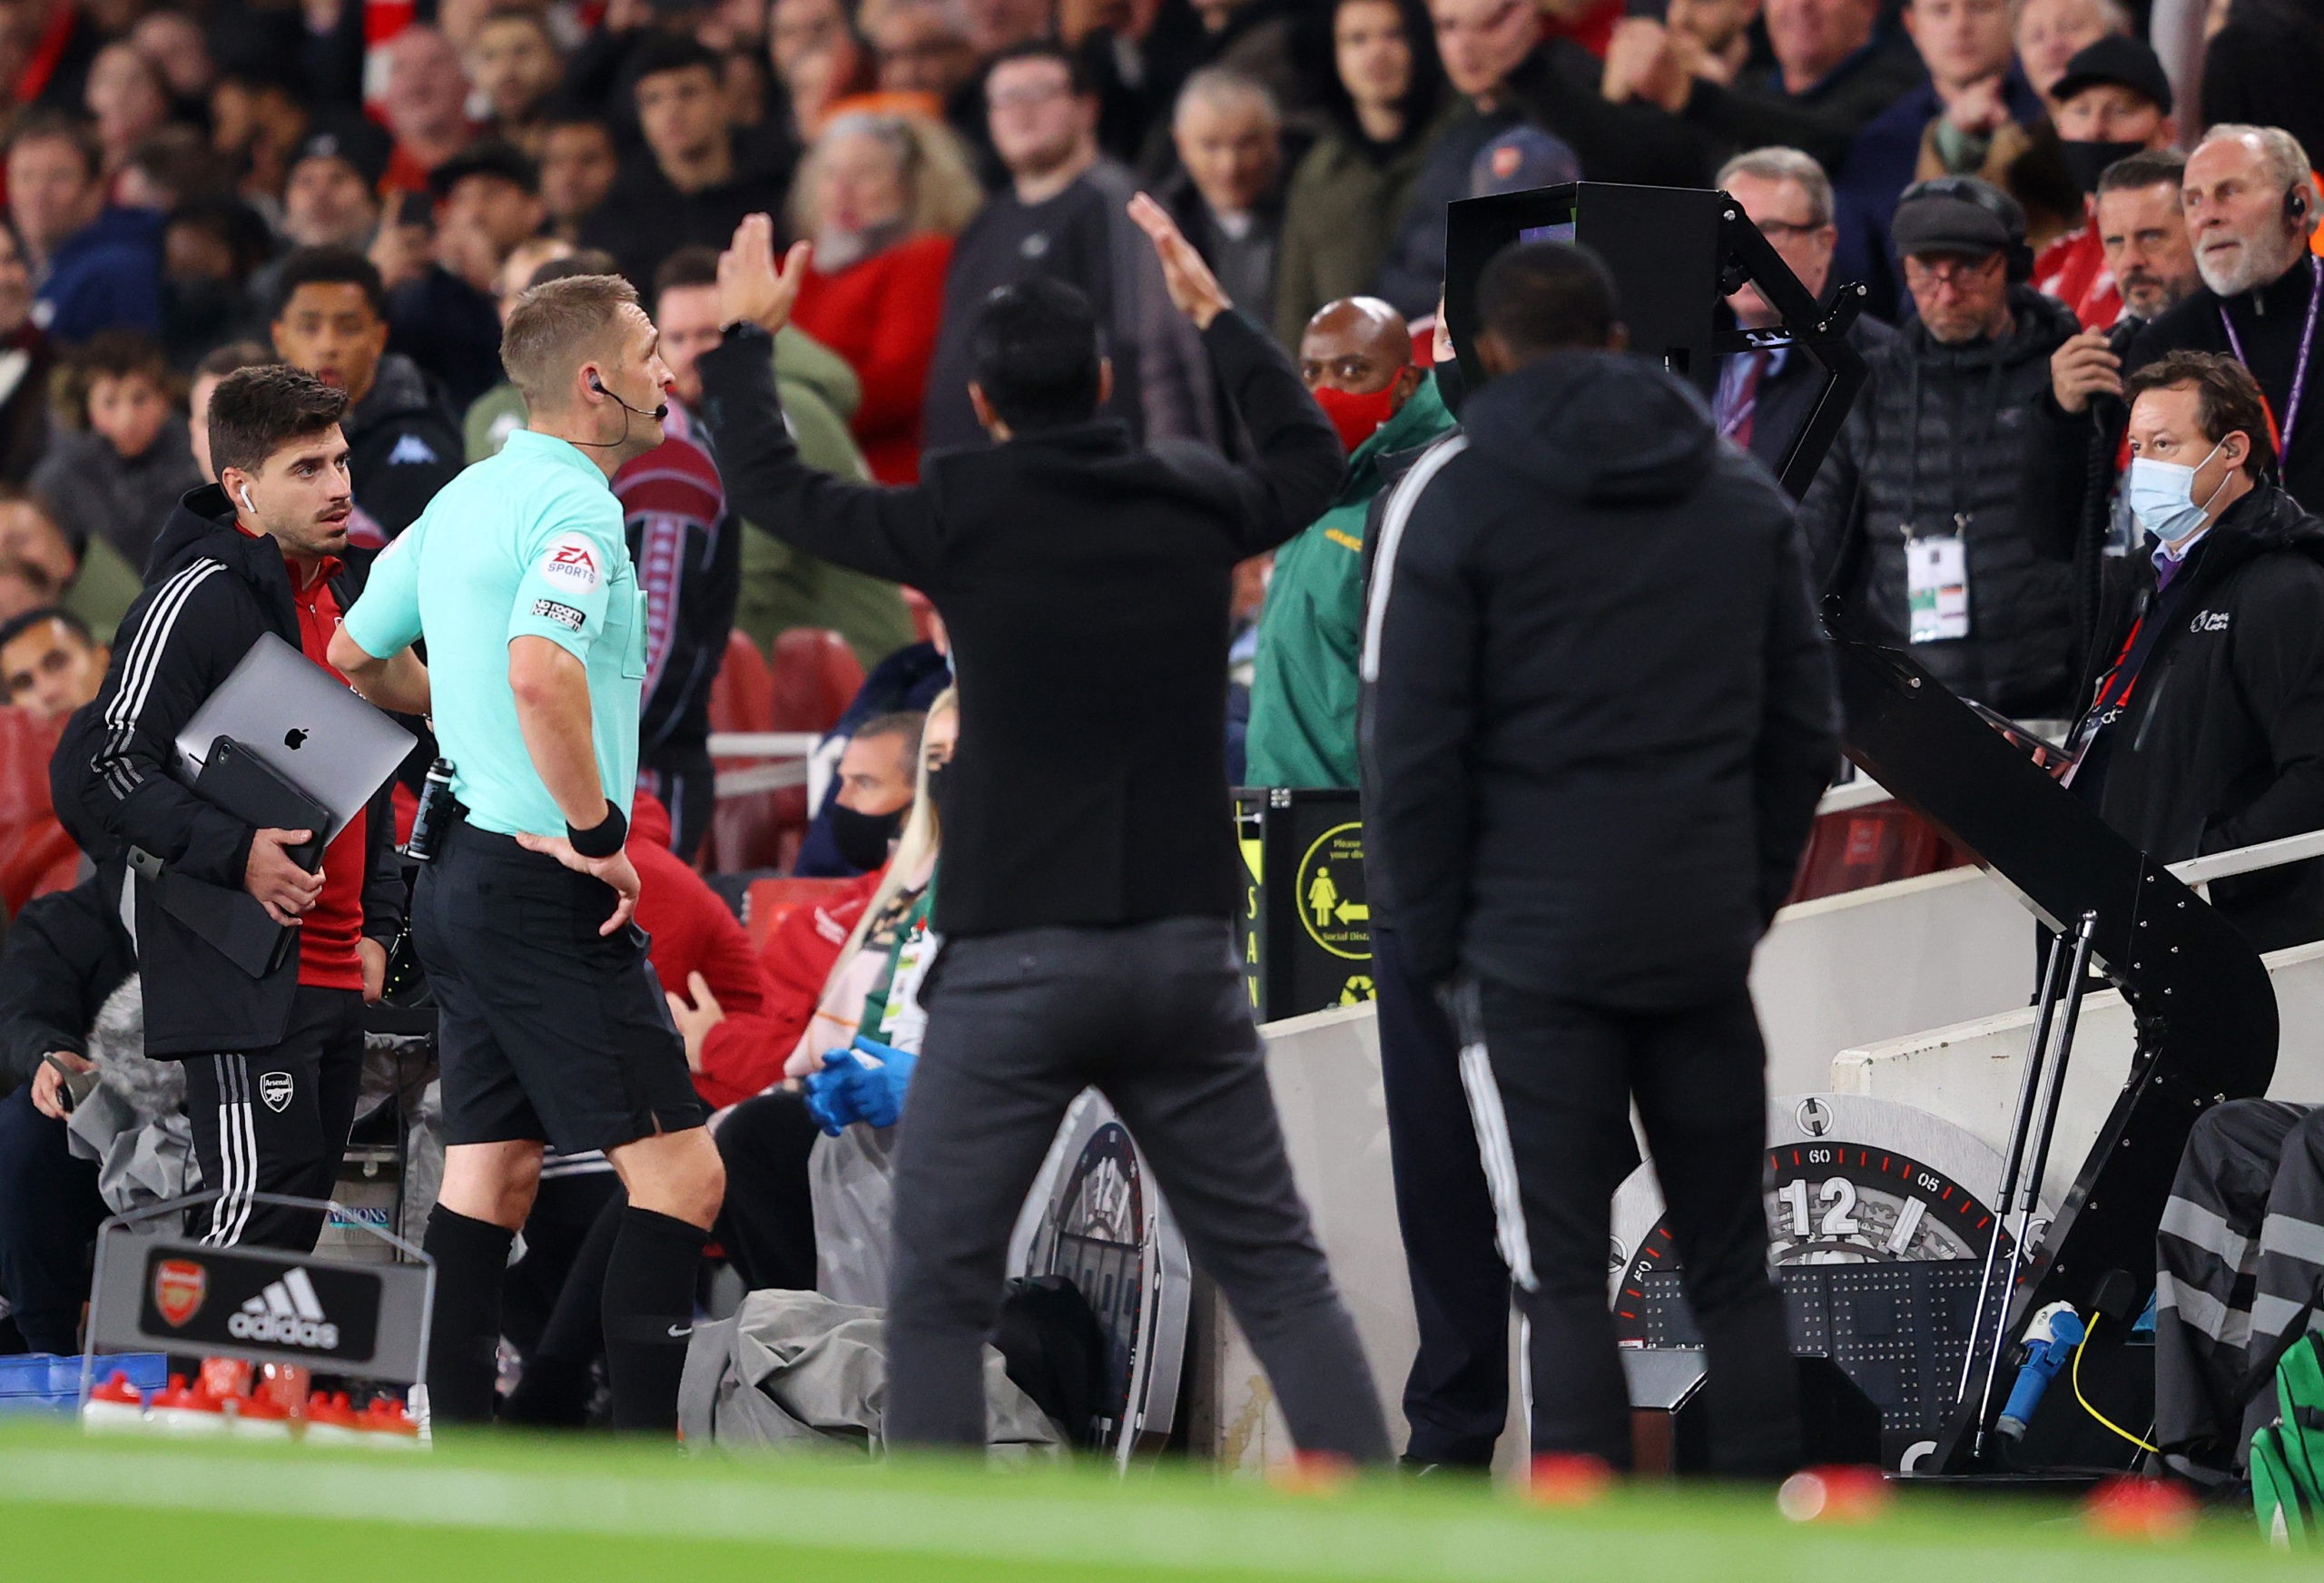 LONDON, ENGLAND - OCTOBER 22: Referee Craig Pawson checks the pitchside monitor during a VAR review before awarding a penalty to Arsenal during the Premier League match between Arsenal and Aston Villa at Emirates Stadium on October 22, 2021 in London, England. (Photo by Richard Heathcote/Getty Images)